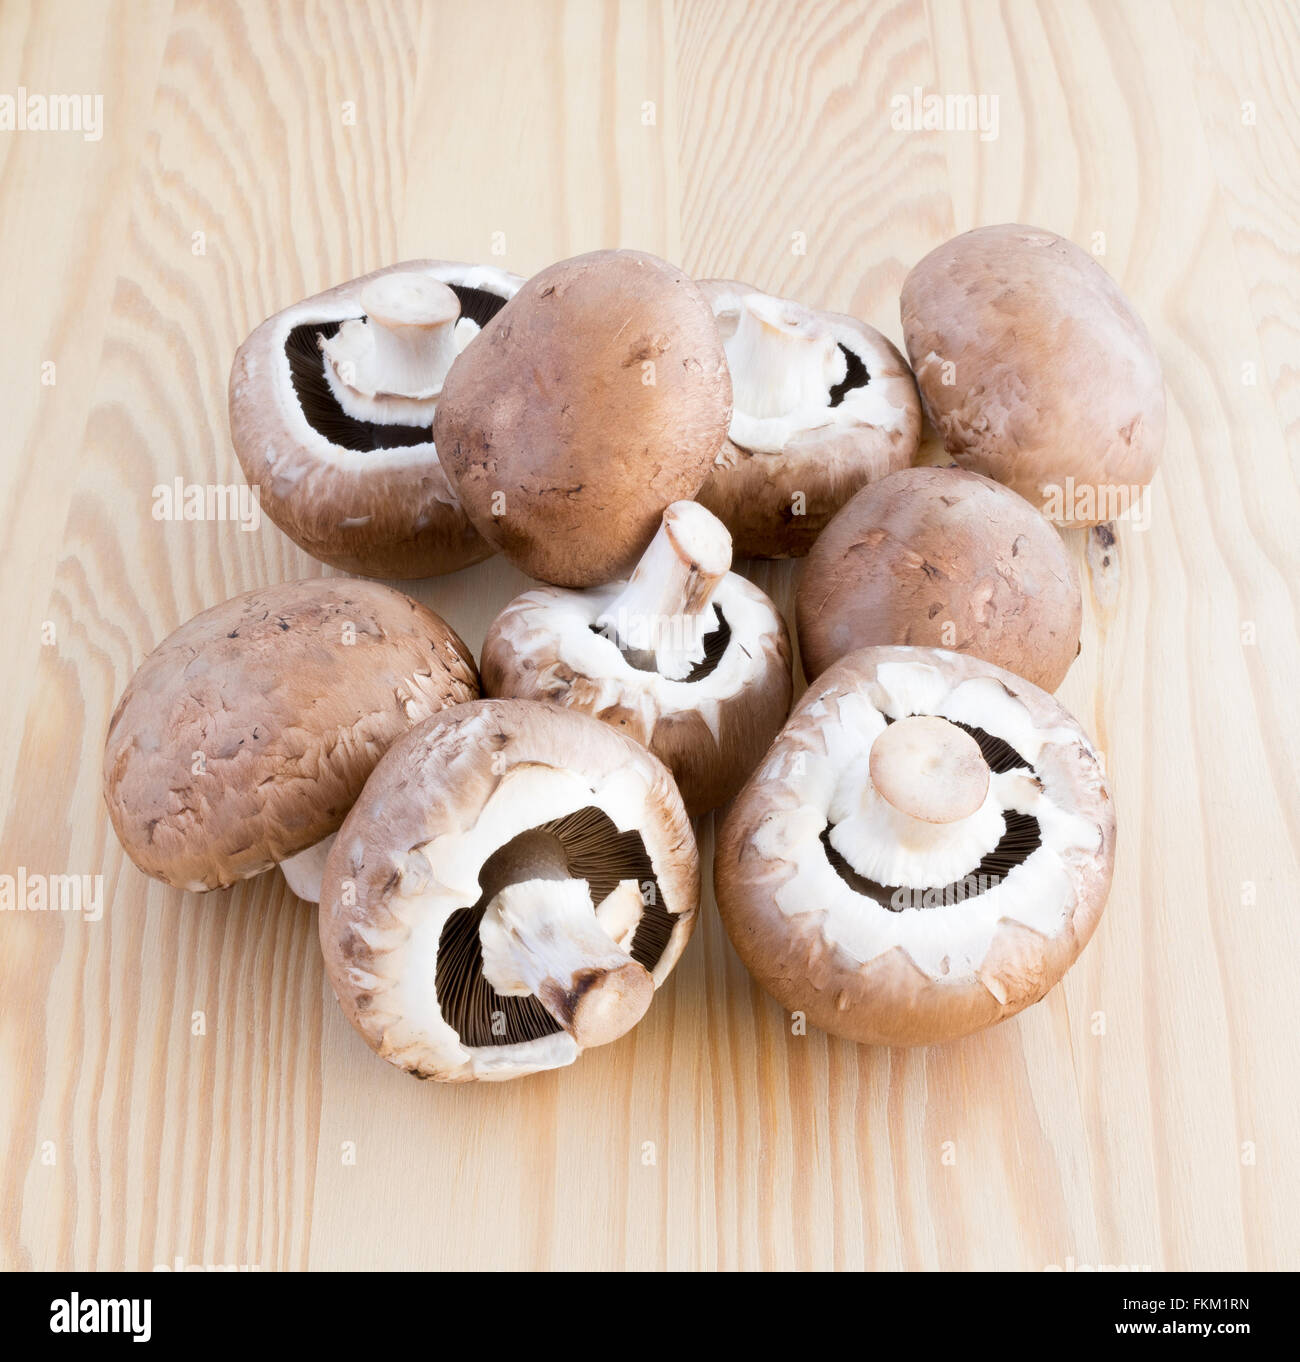 Many chestnut mushrooms on a wooden cutting board Stock Photo